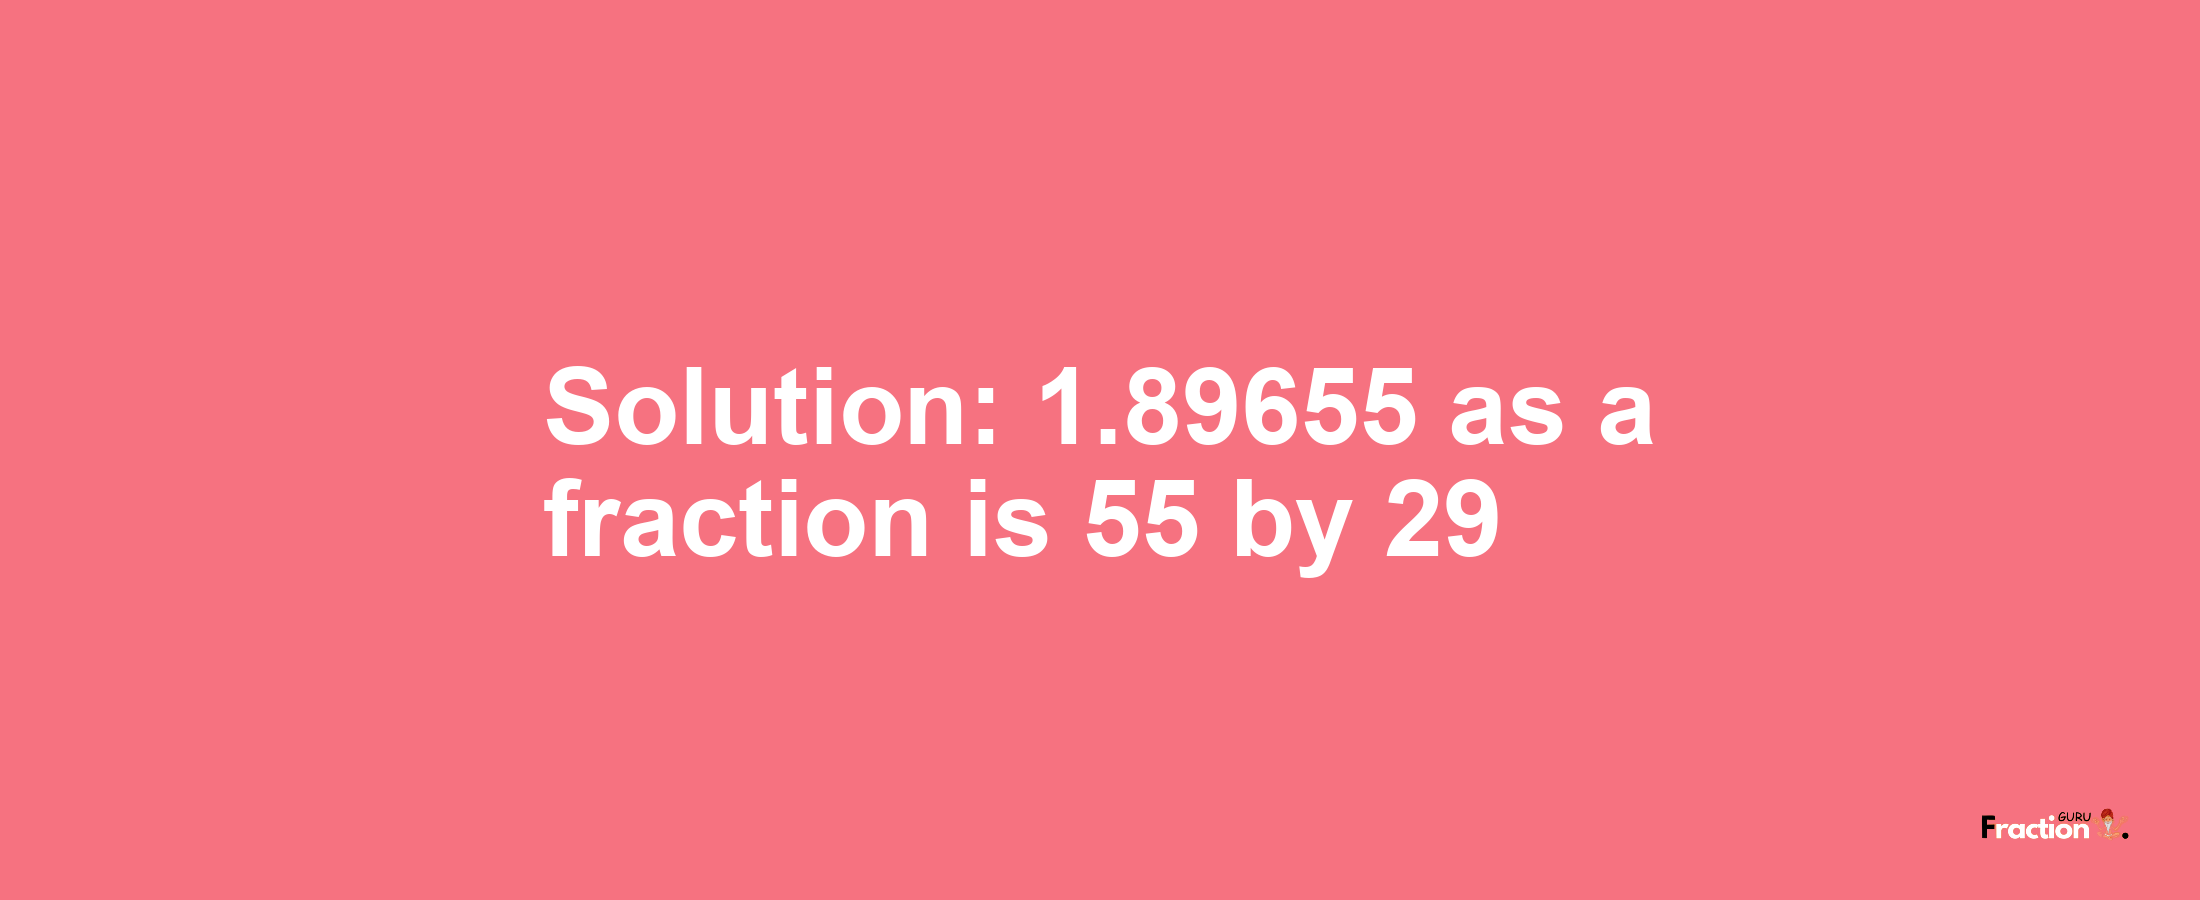 Solution:1.89655 as a fraction is 55/29